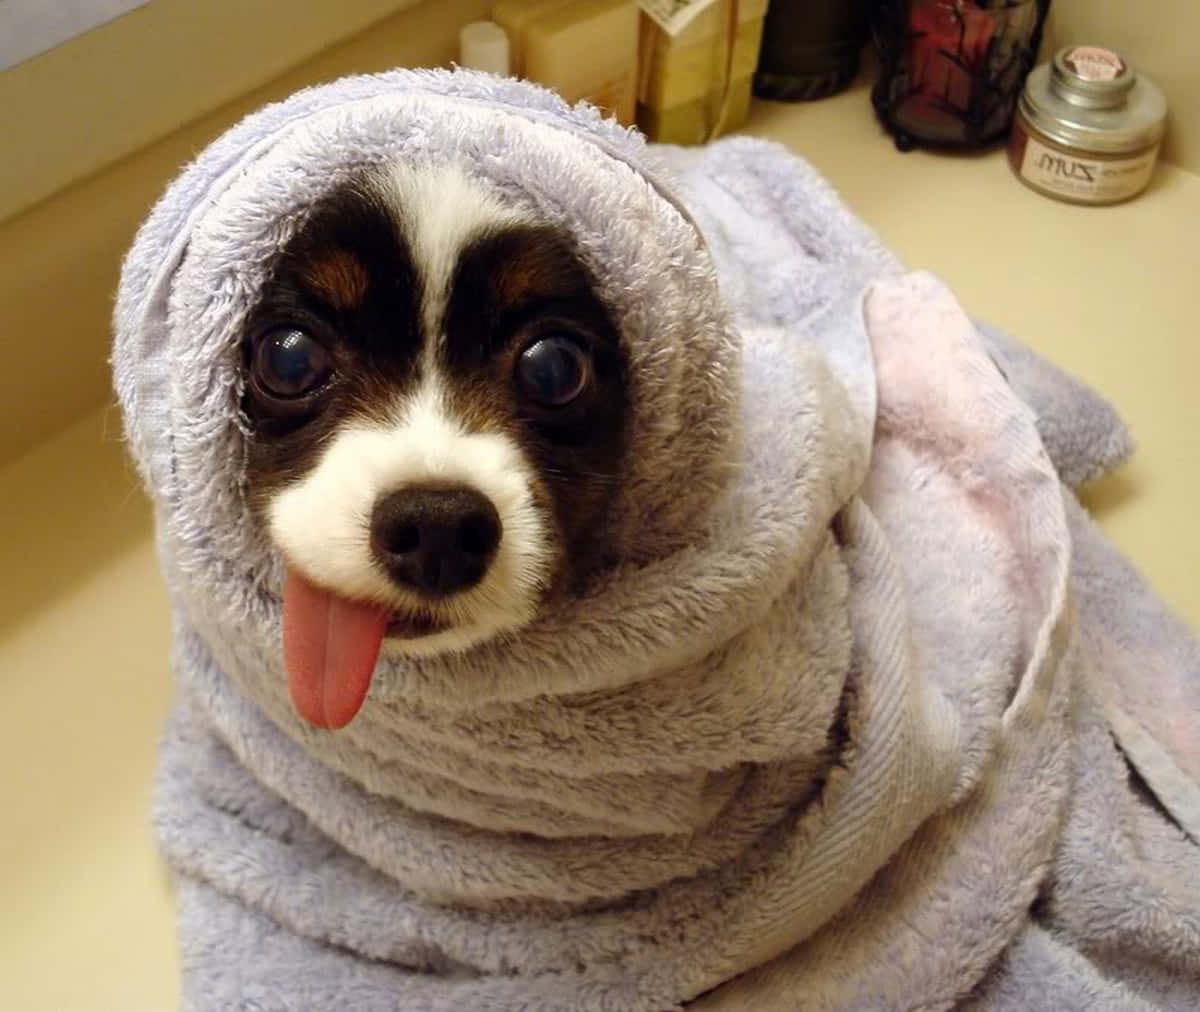 A Dog Is Wrapped In A Towel